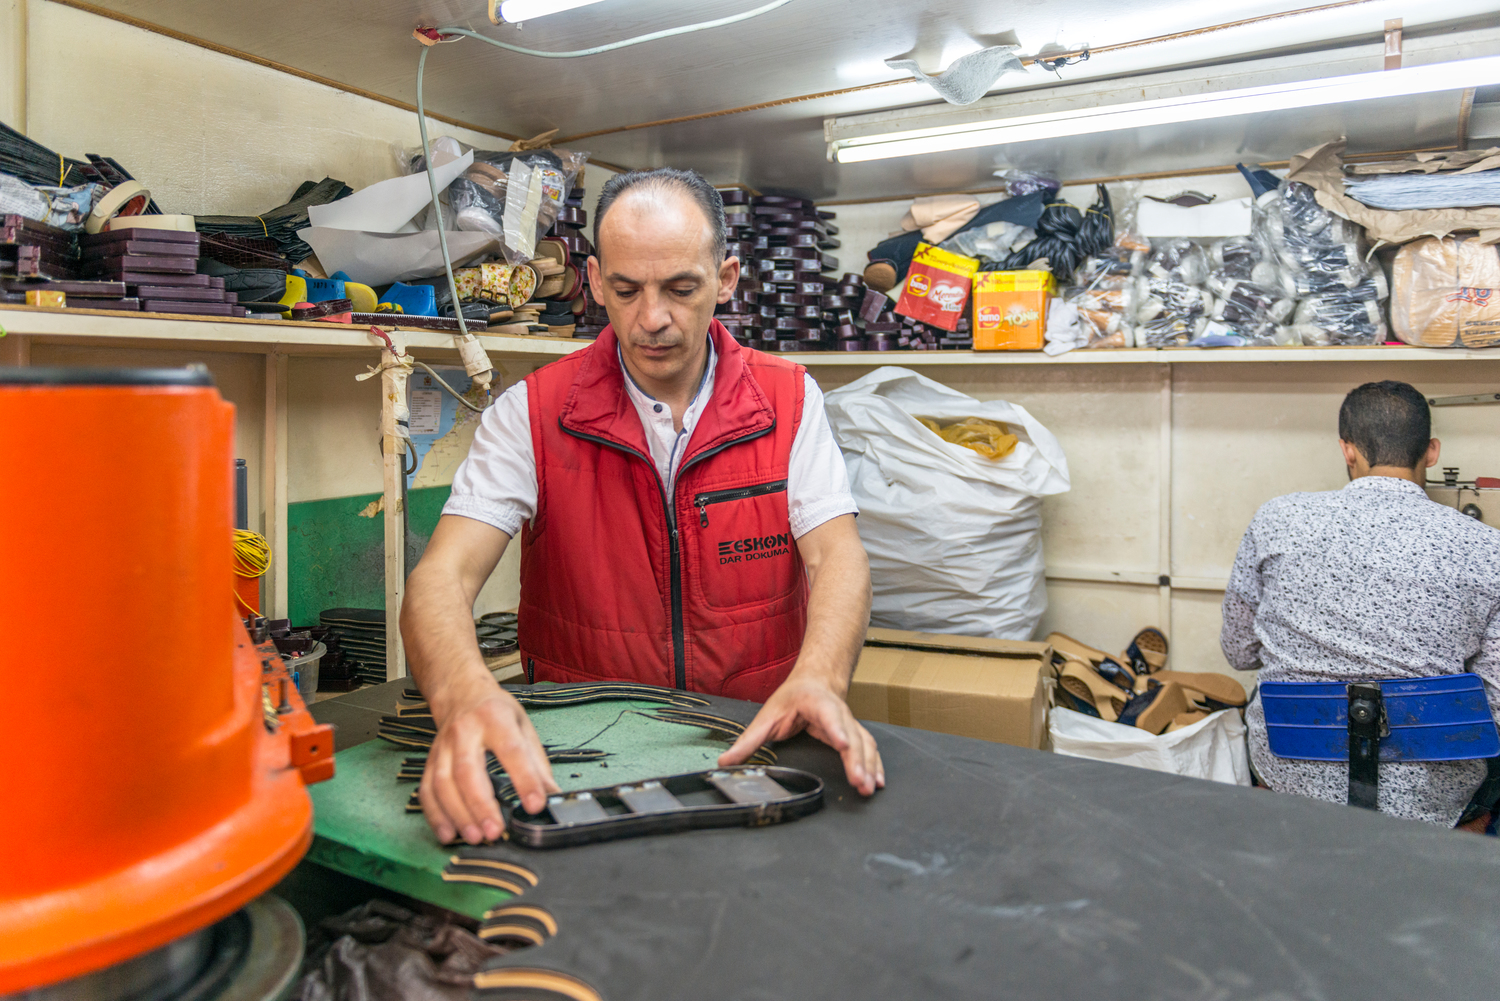 A Syrian refugee and a shoemaker in his thriving workshop in Casablanca after winning a first prize for the most successful enterprising refugee project